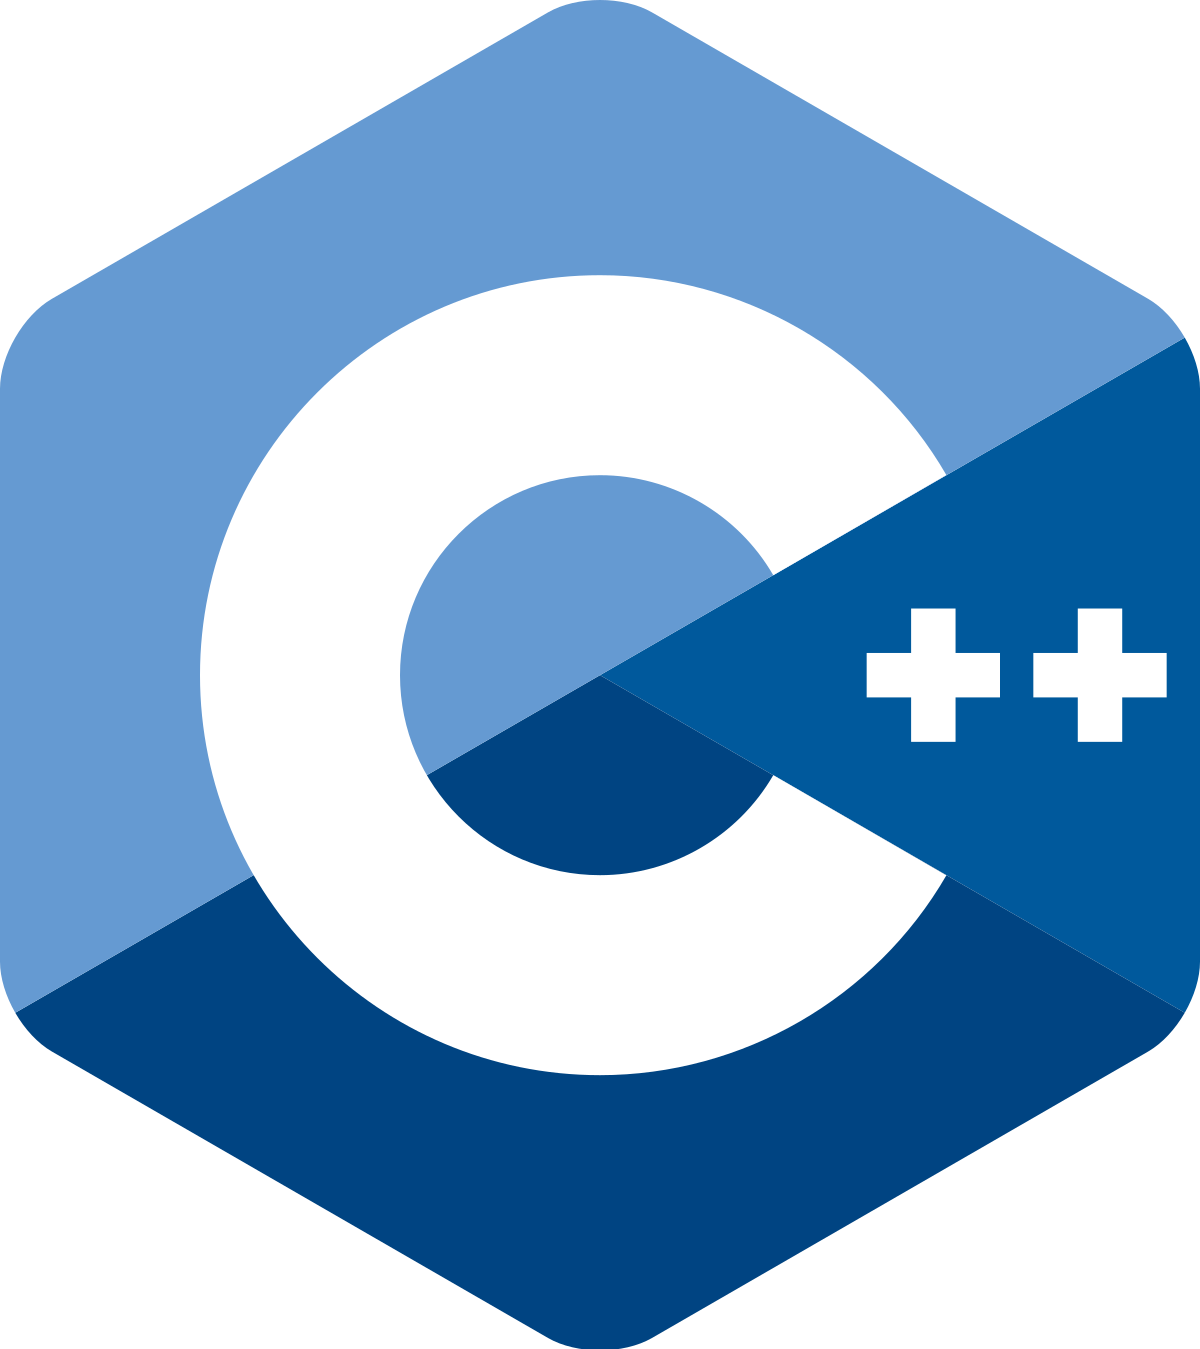 How To Swap Two Number Value In C Without Third Variable - C++ Logo Png (1200x1349)